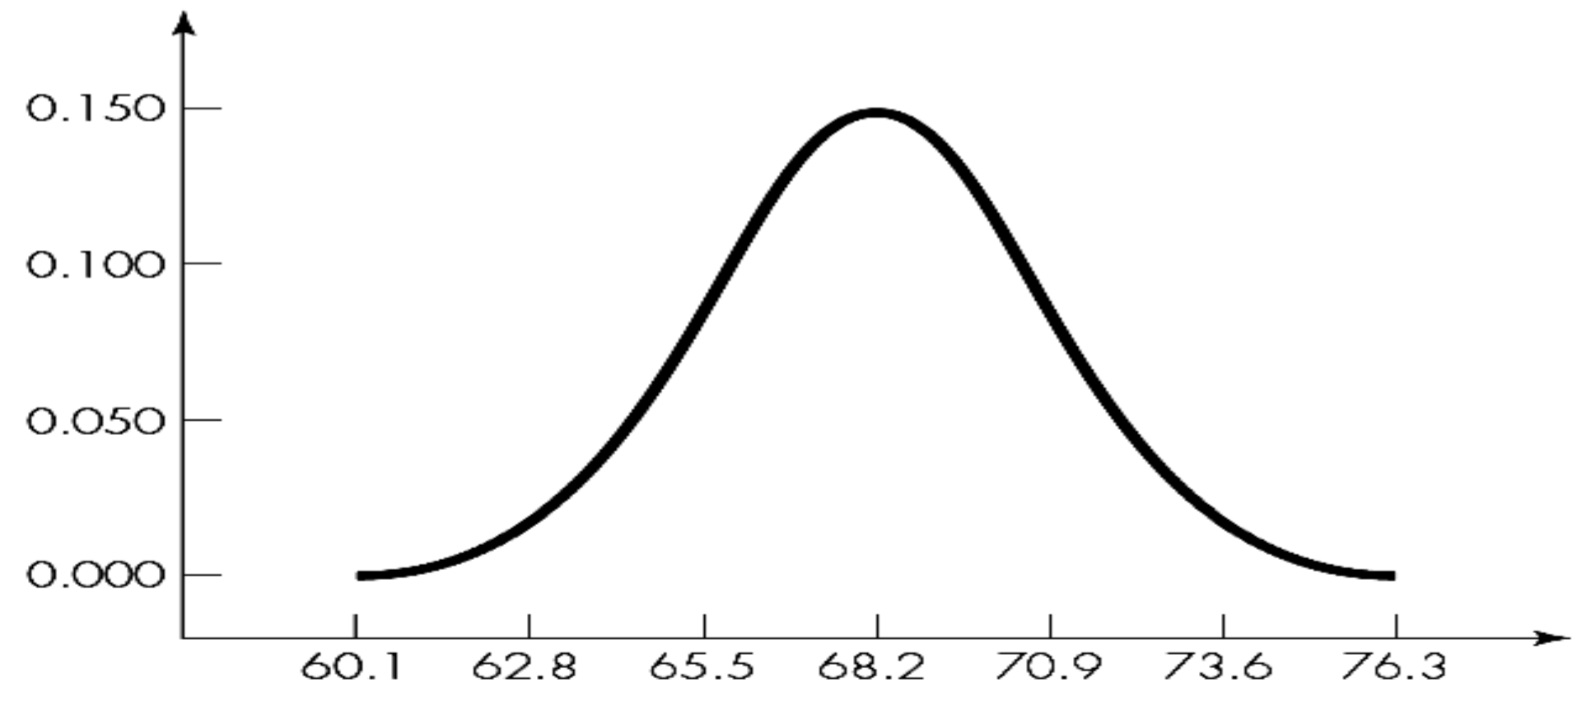 Probability density curve for our distribution